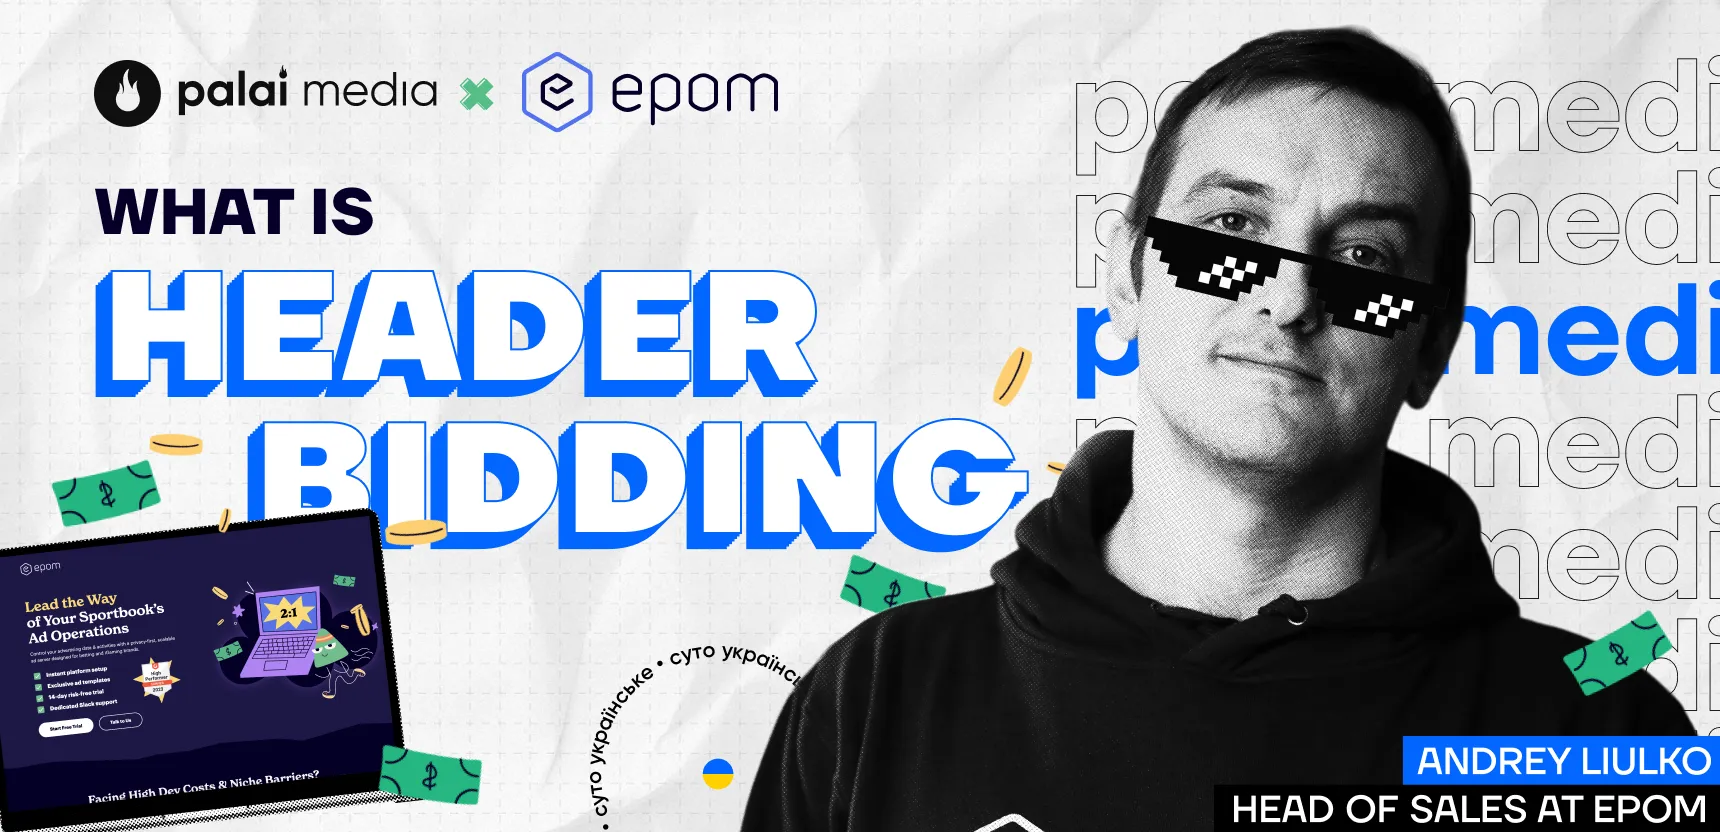 What is Header Bidding or рow to earn more ifyou’re a gambling publisher?